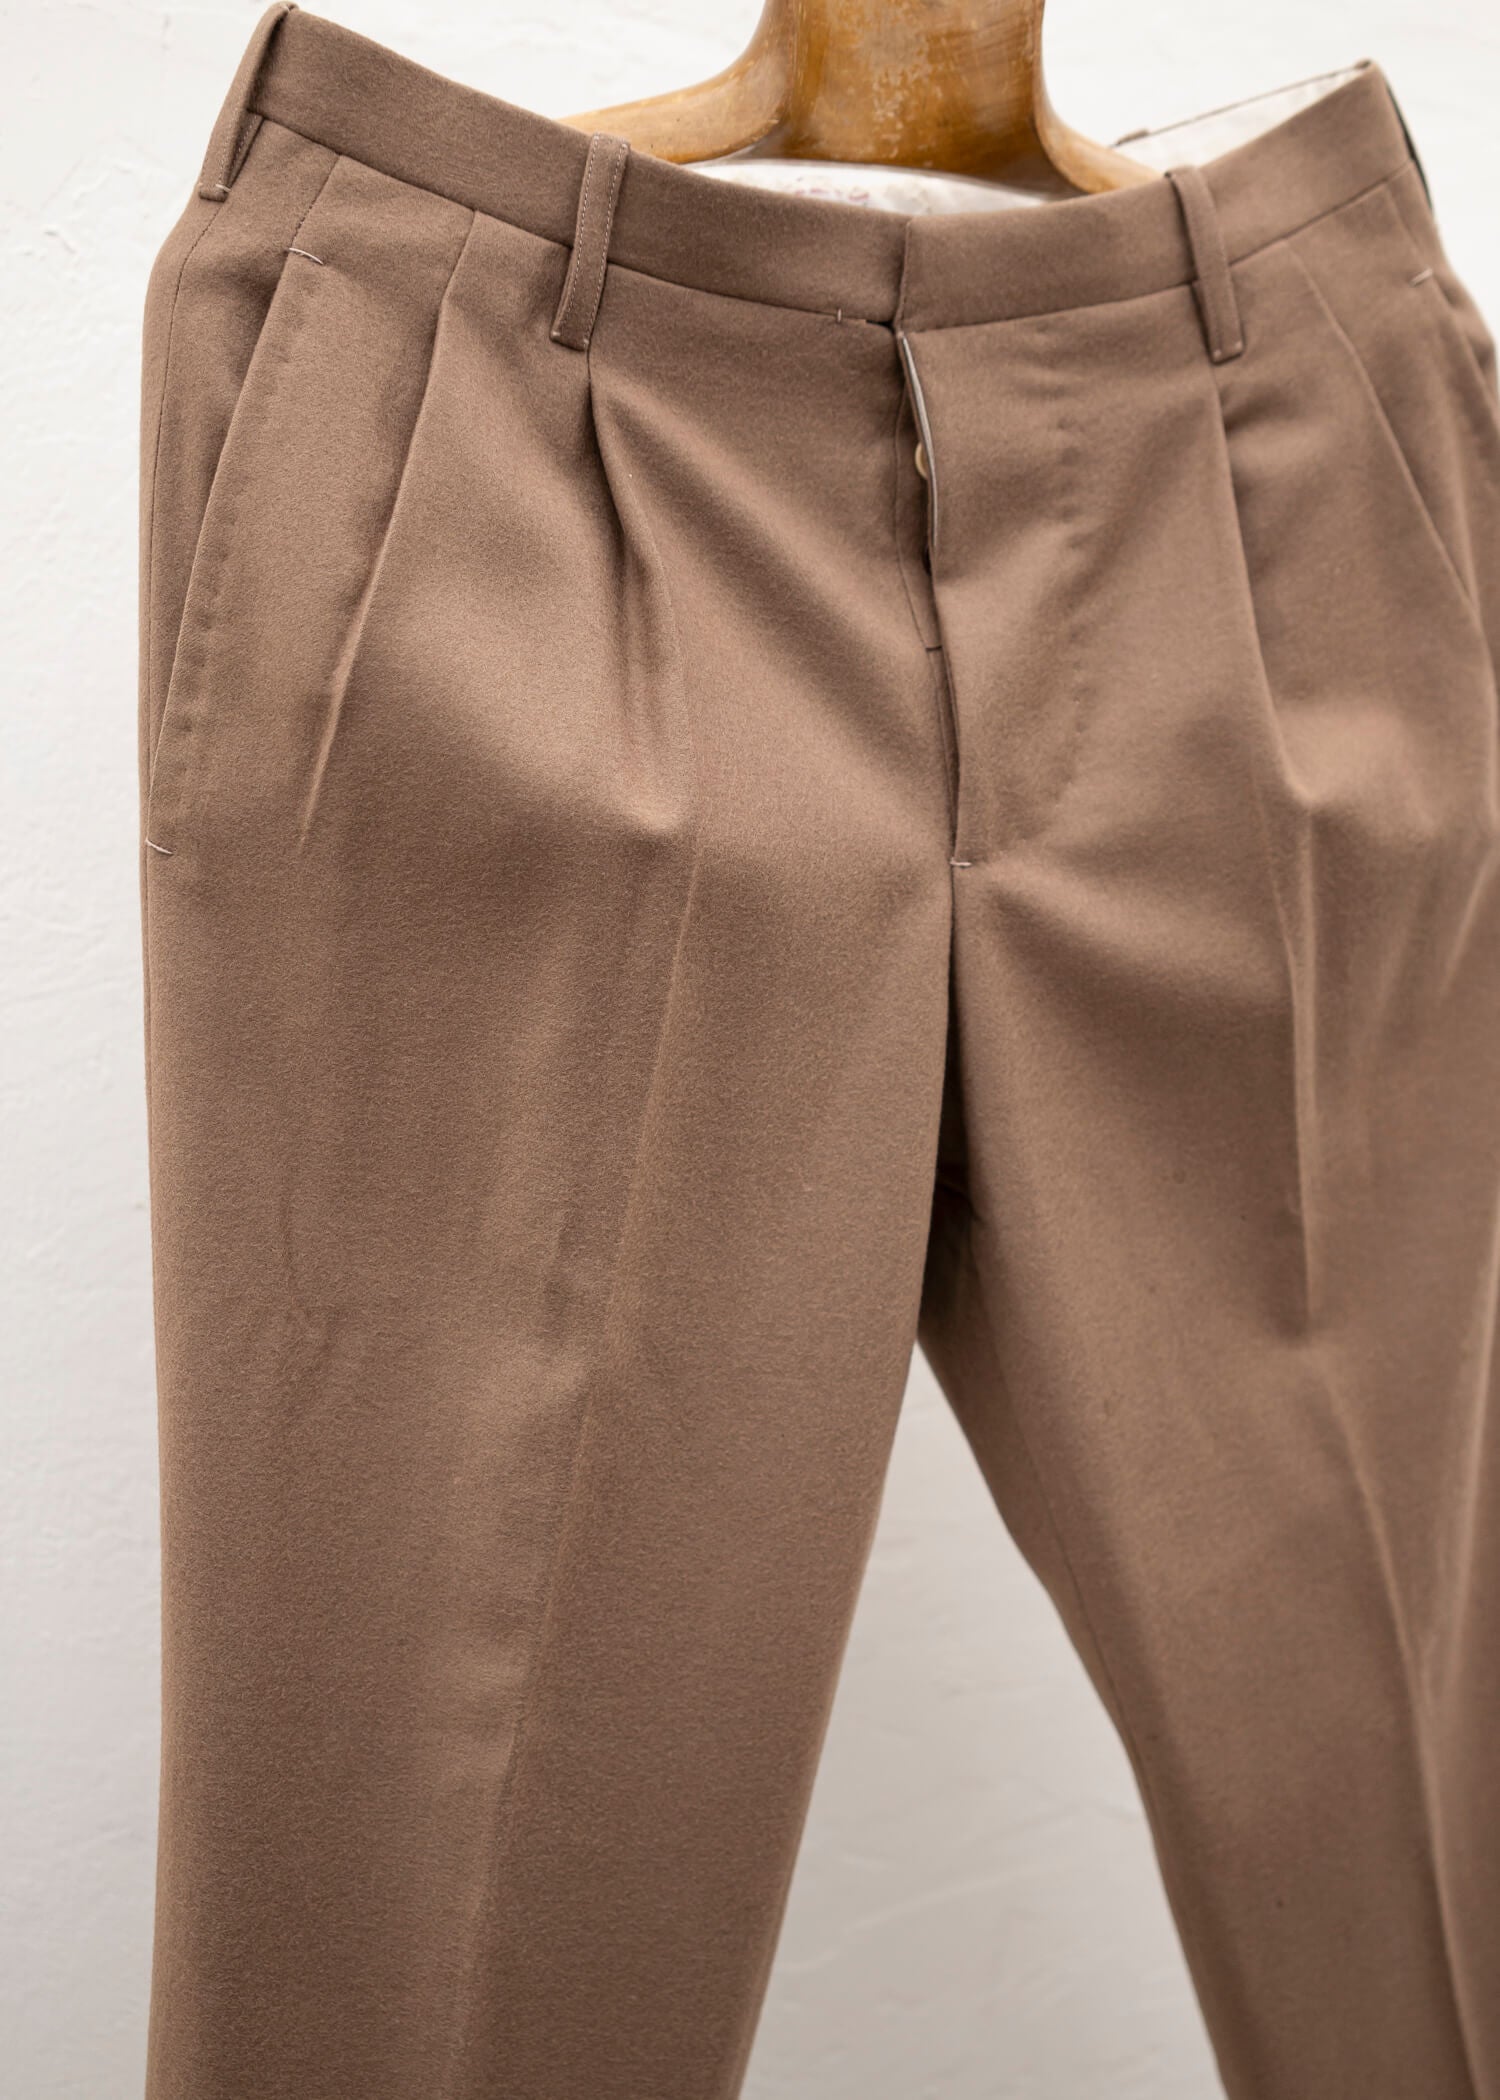 HANDMADE The crooked Tailor Trousers